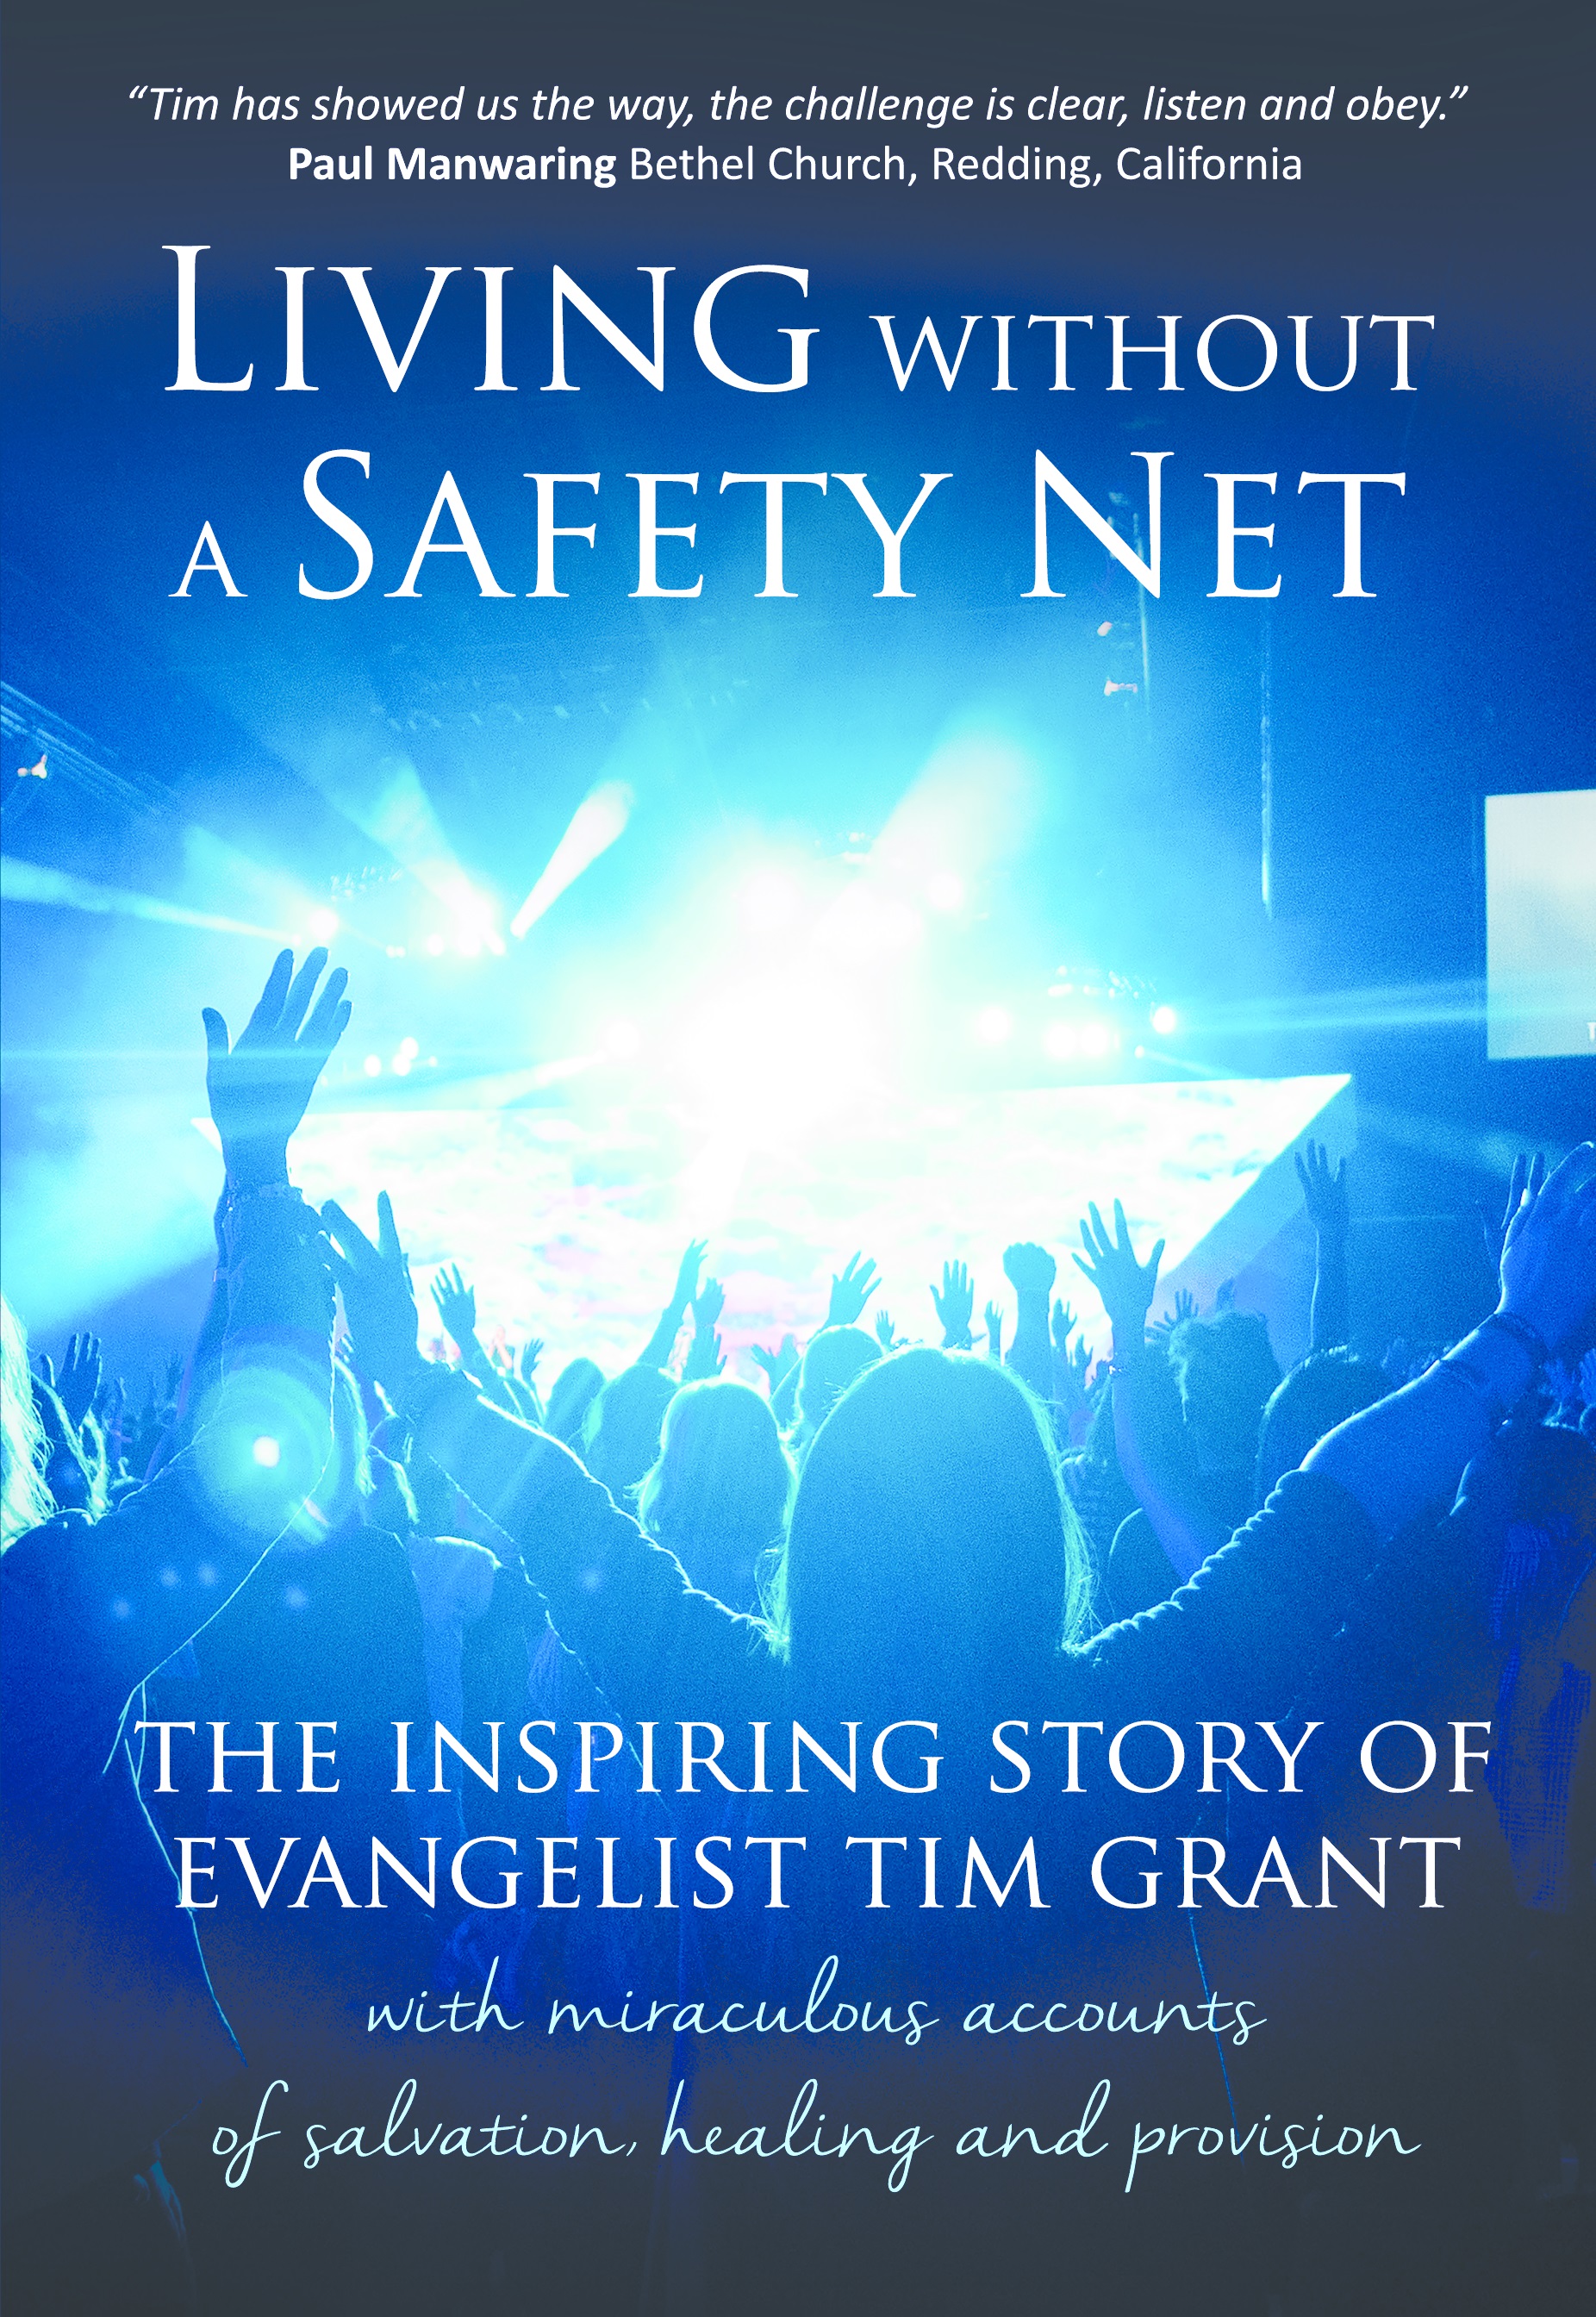 More information on Living Without a Safety Net